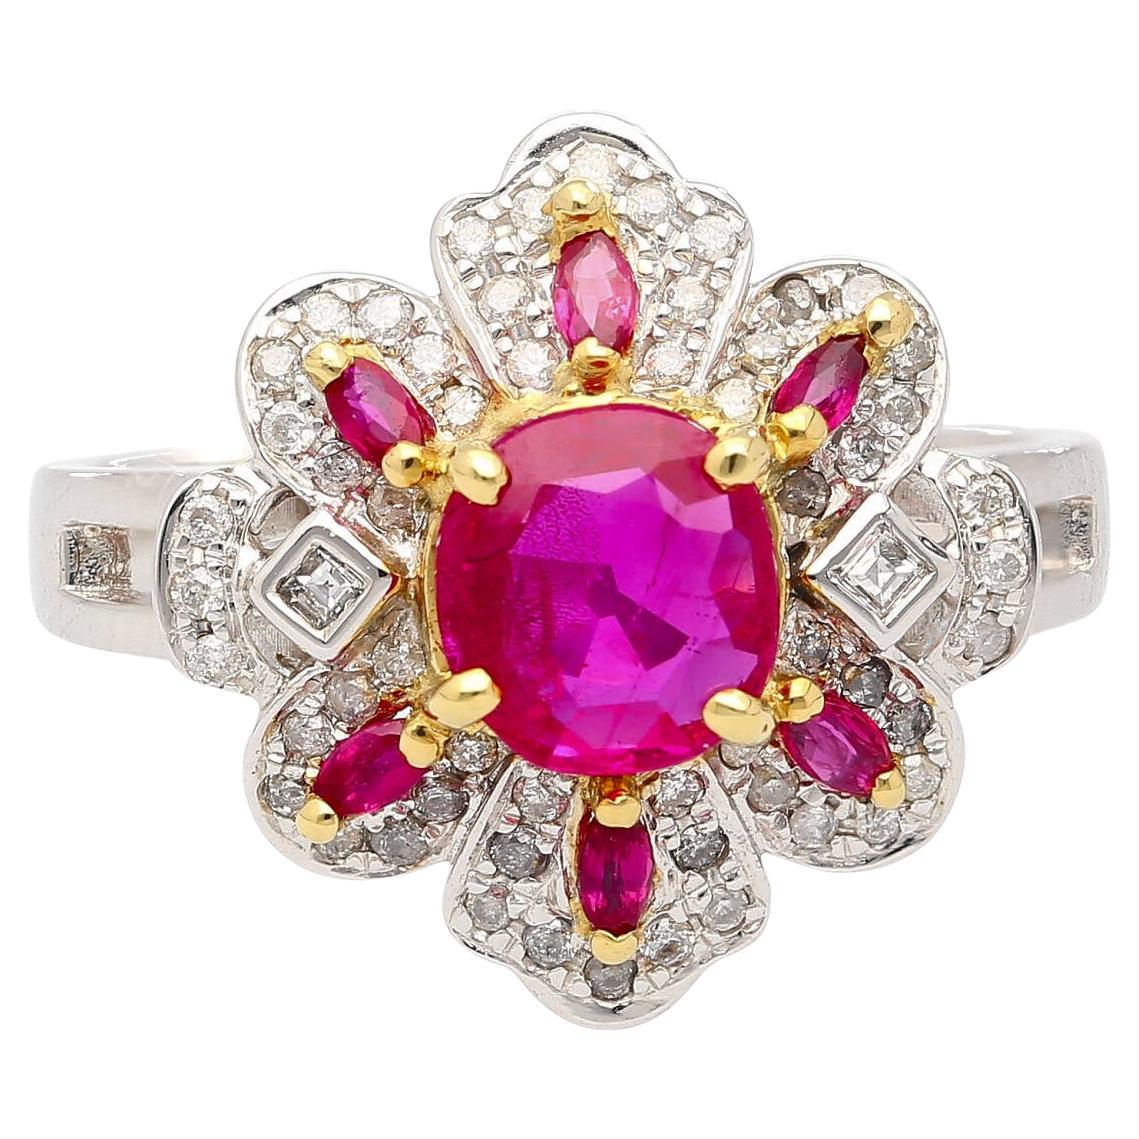 Natural Pinkish Red Ruby & Diamond Floral Motif Ring in 14K White Gold